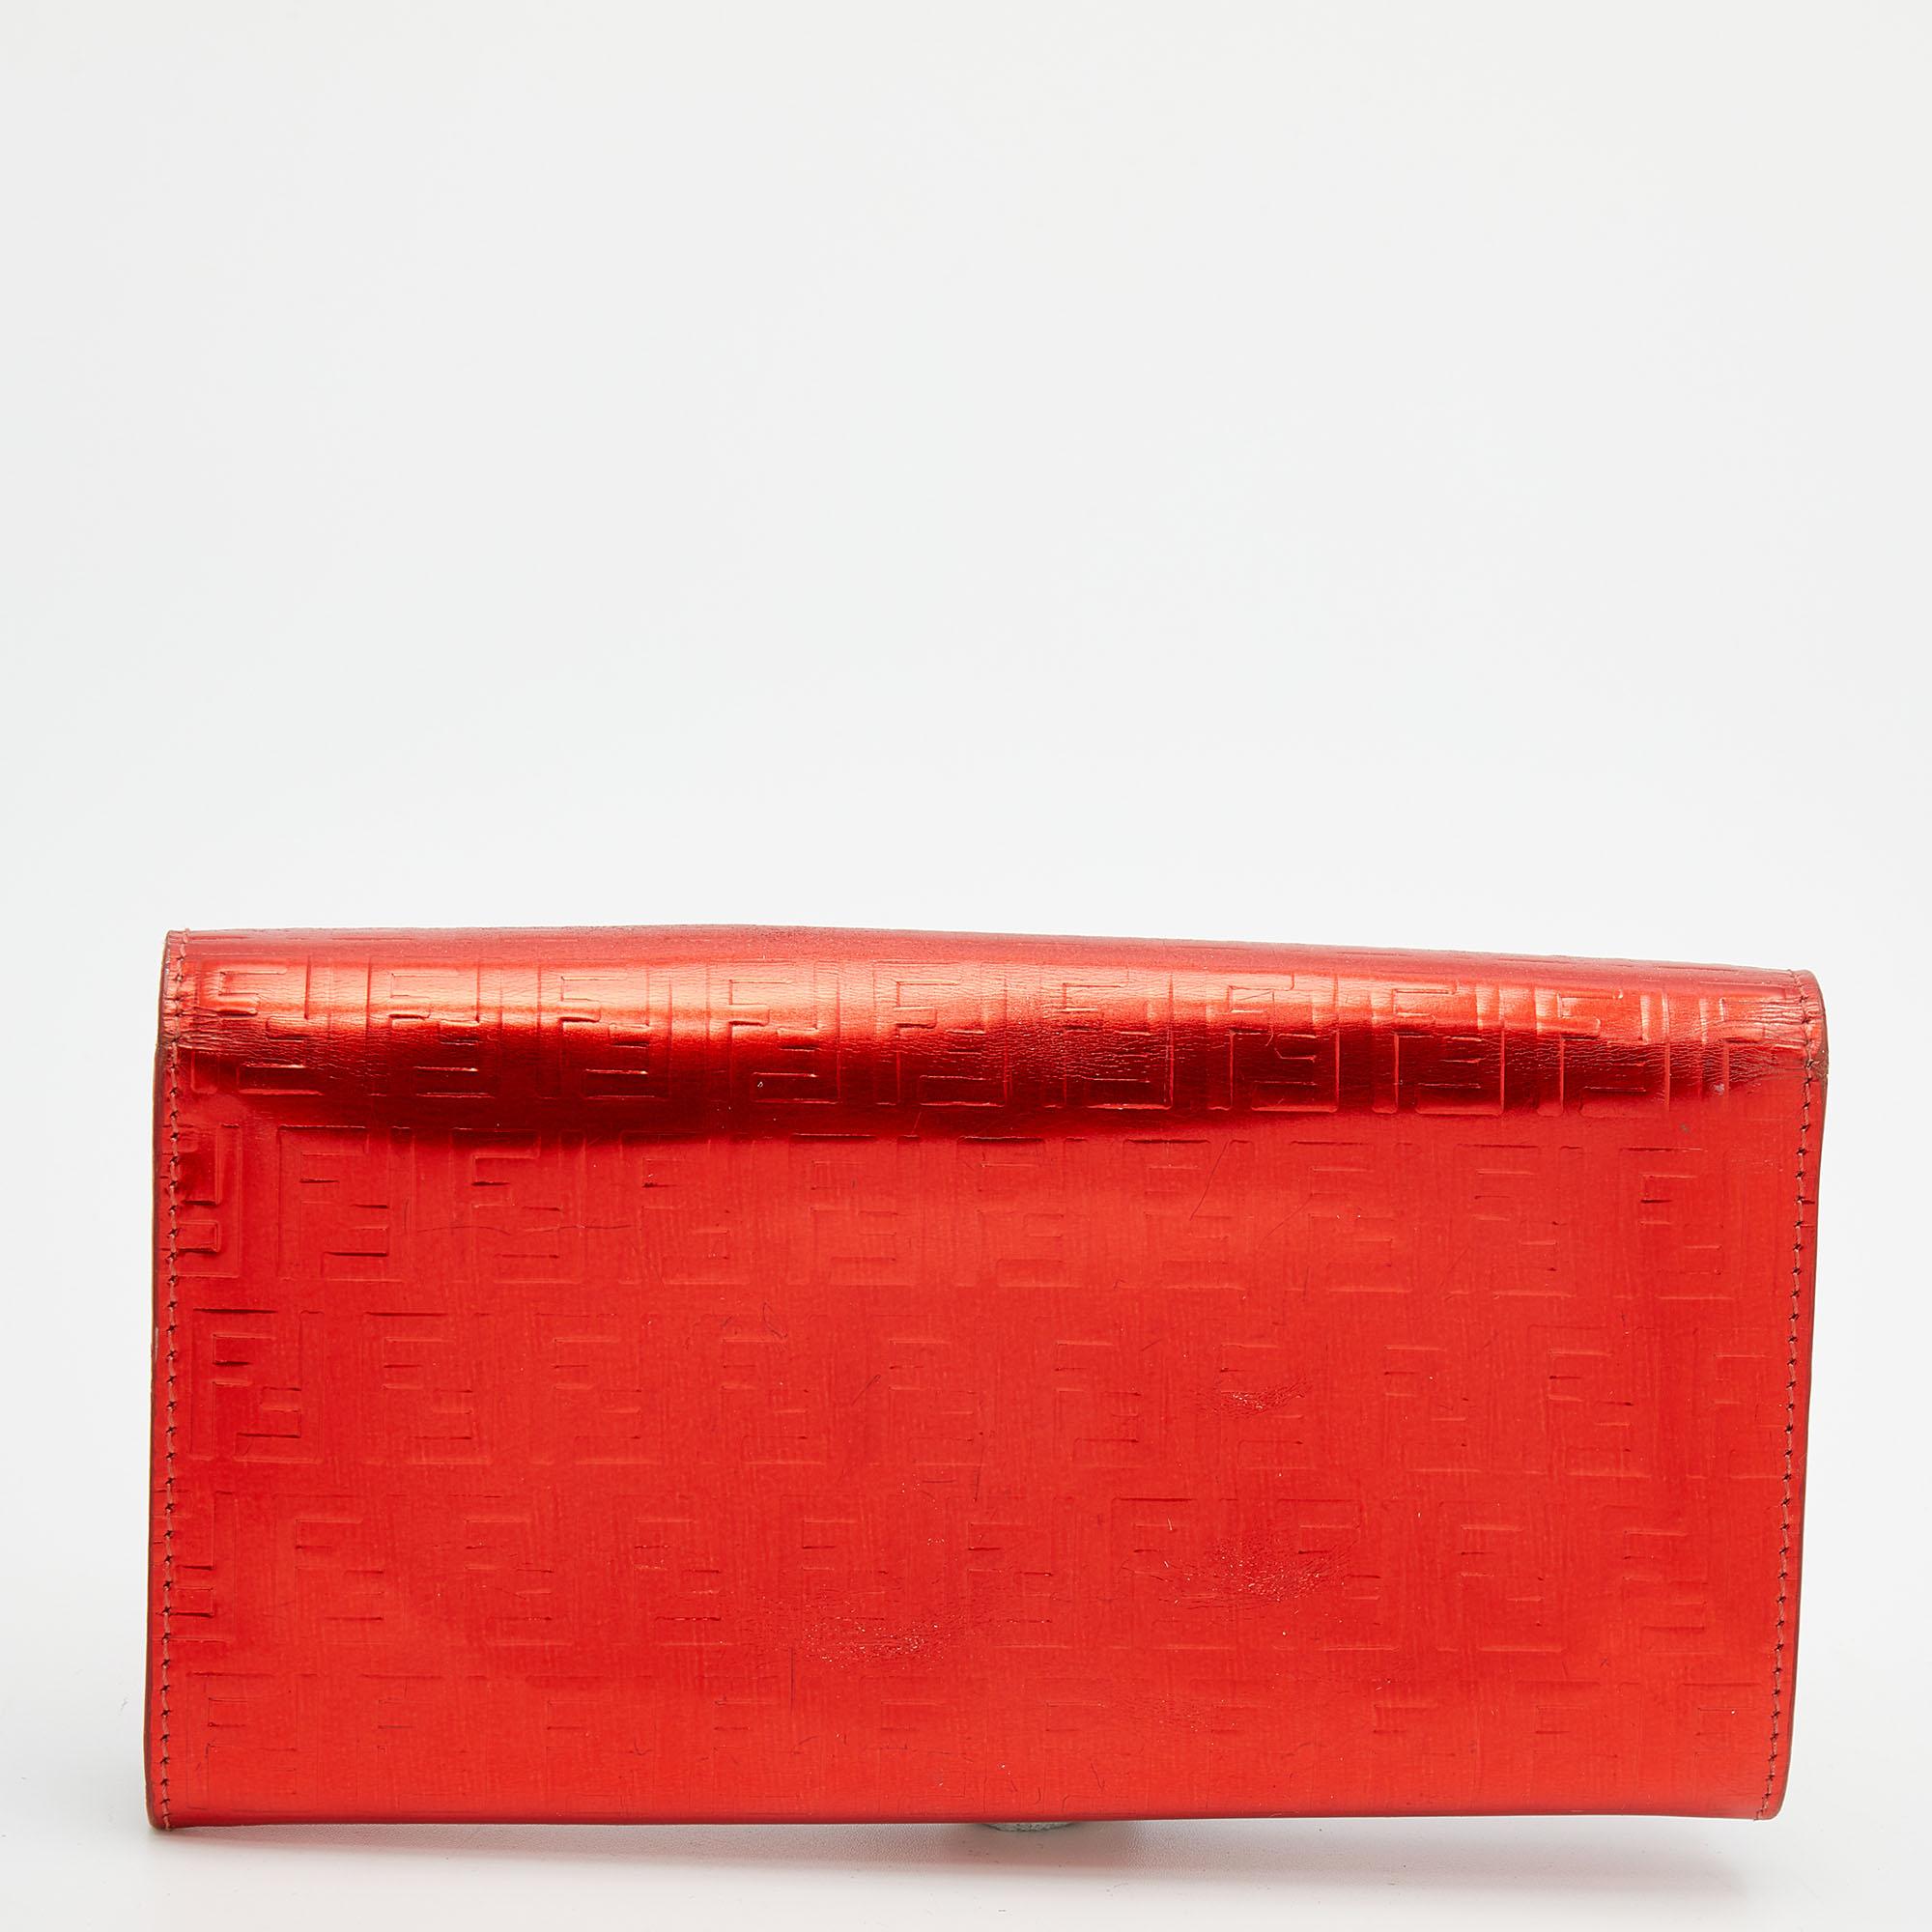 This Fendi wallet is a host to a number of functional details. With a notable design, it comes made from a red Zucchino patent leather and flaunts gold-tone hardware. Its coated canvas and fabric interior is divided into two compartments by a zipper